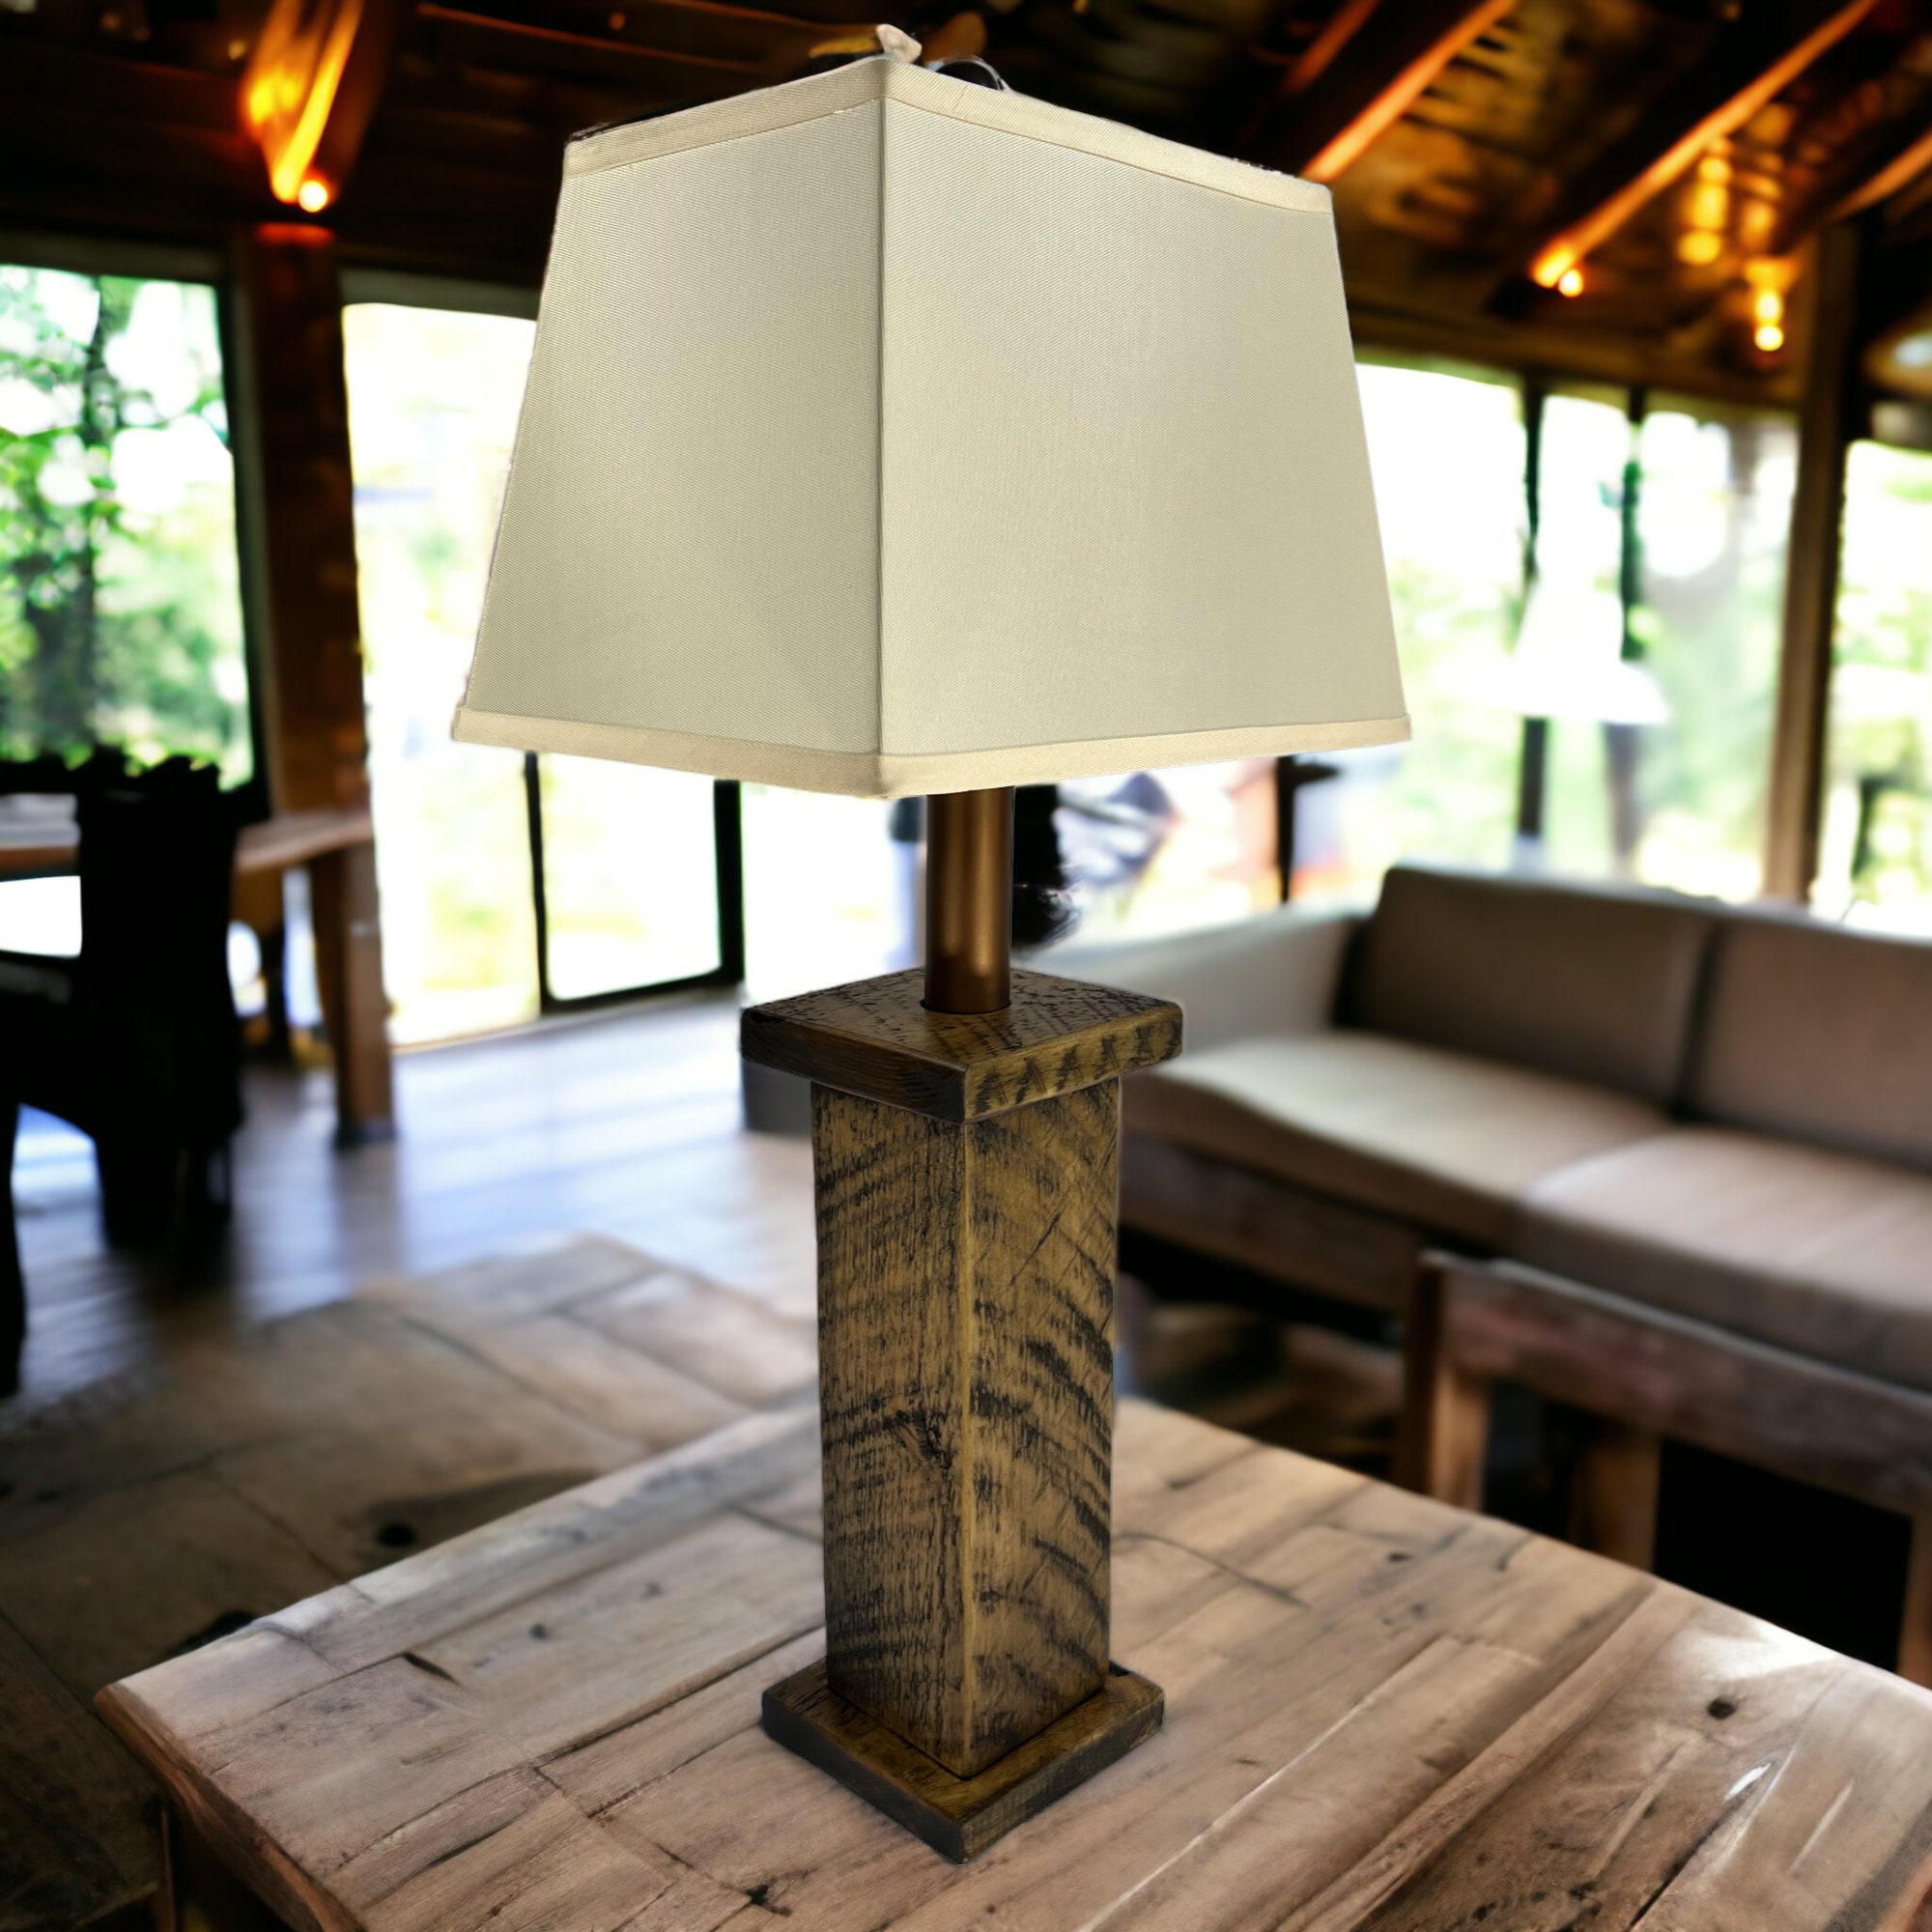 House & Home - 18 Wireless Table Lamps For Indoors And Out